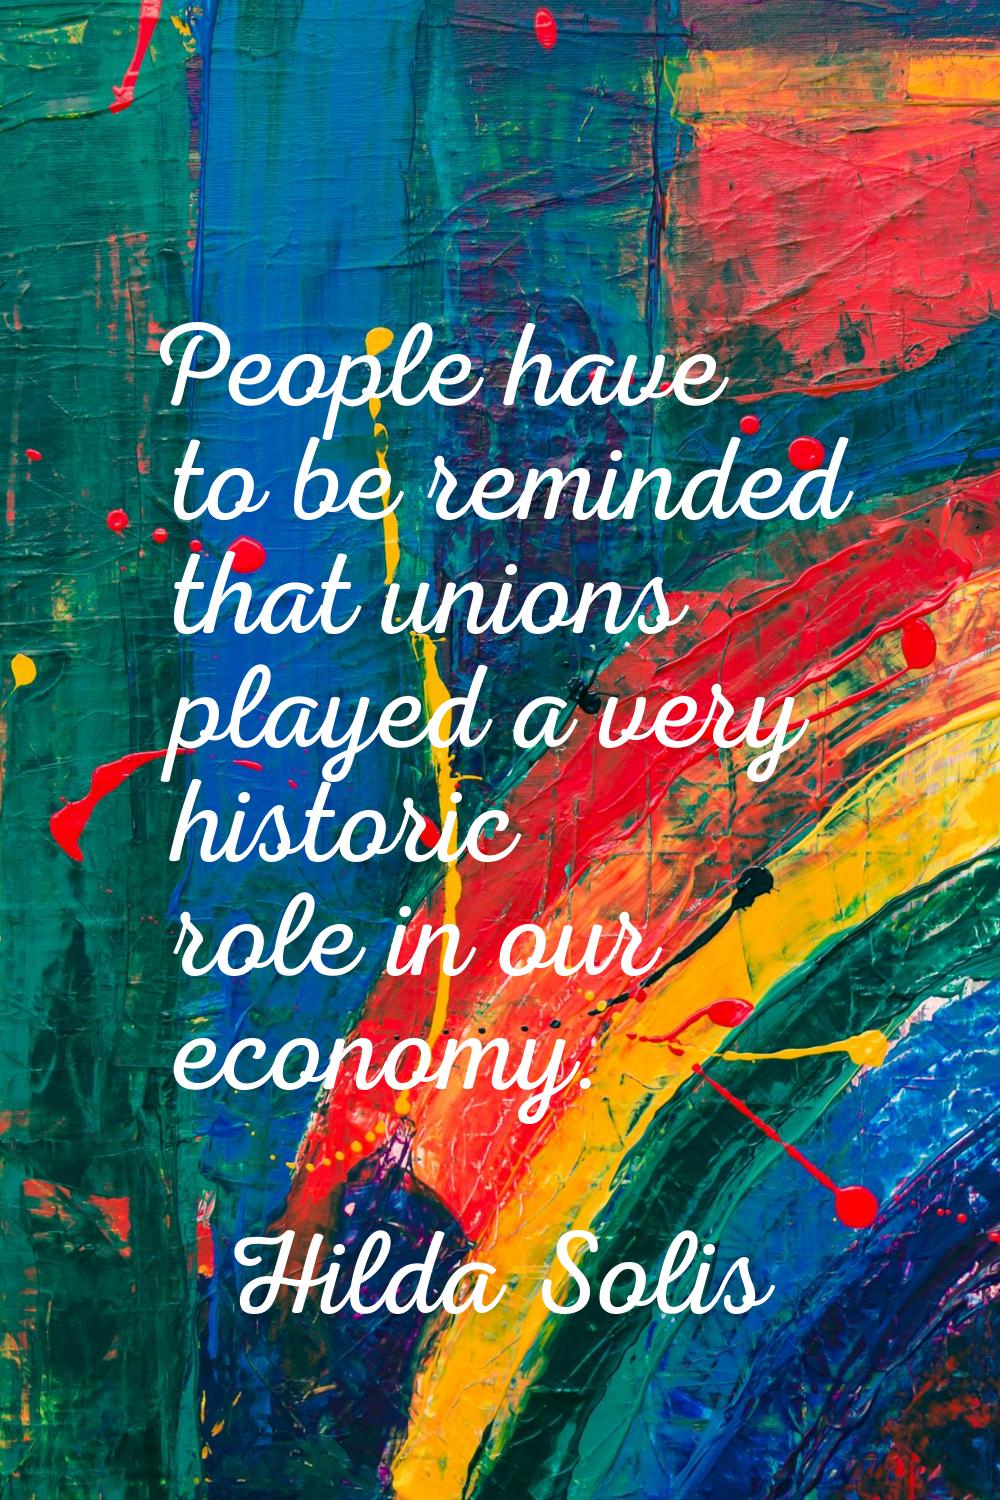 People have to be reminded that unions played a very historic role in our economy.